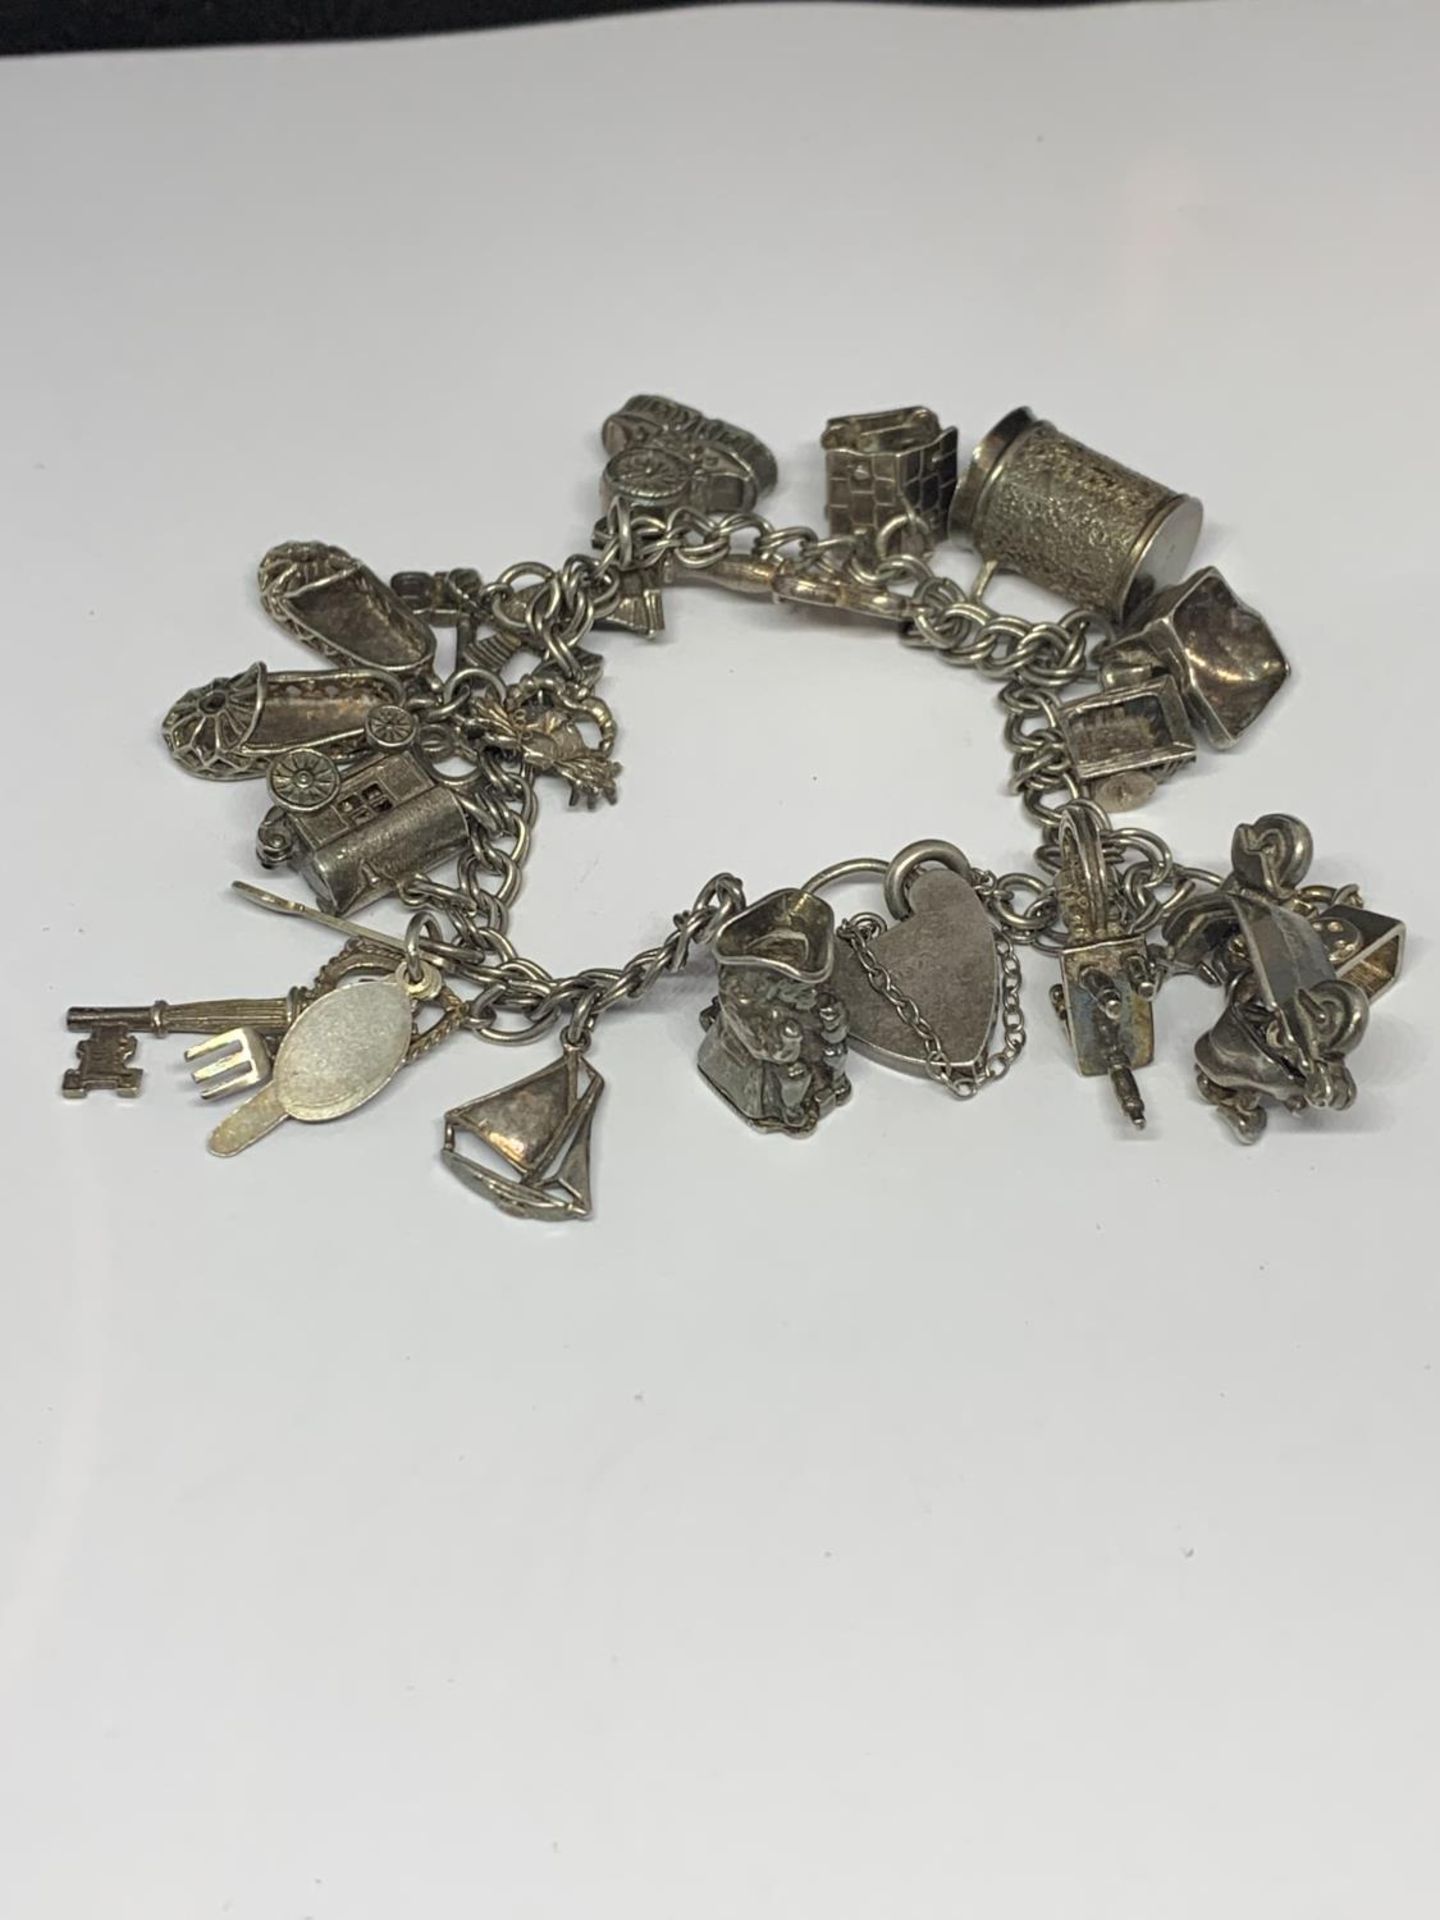 A SILVER CHARM BRACELET WITH EIGHTEEN CHARMS - Image 2 of 6